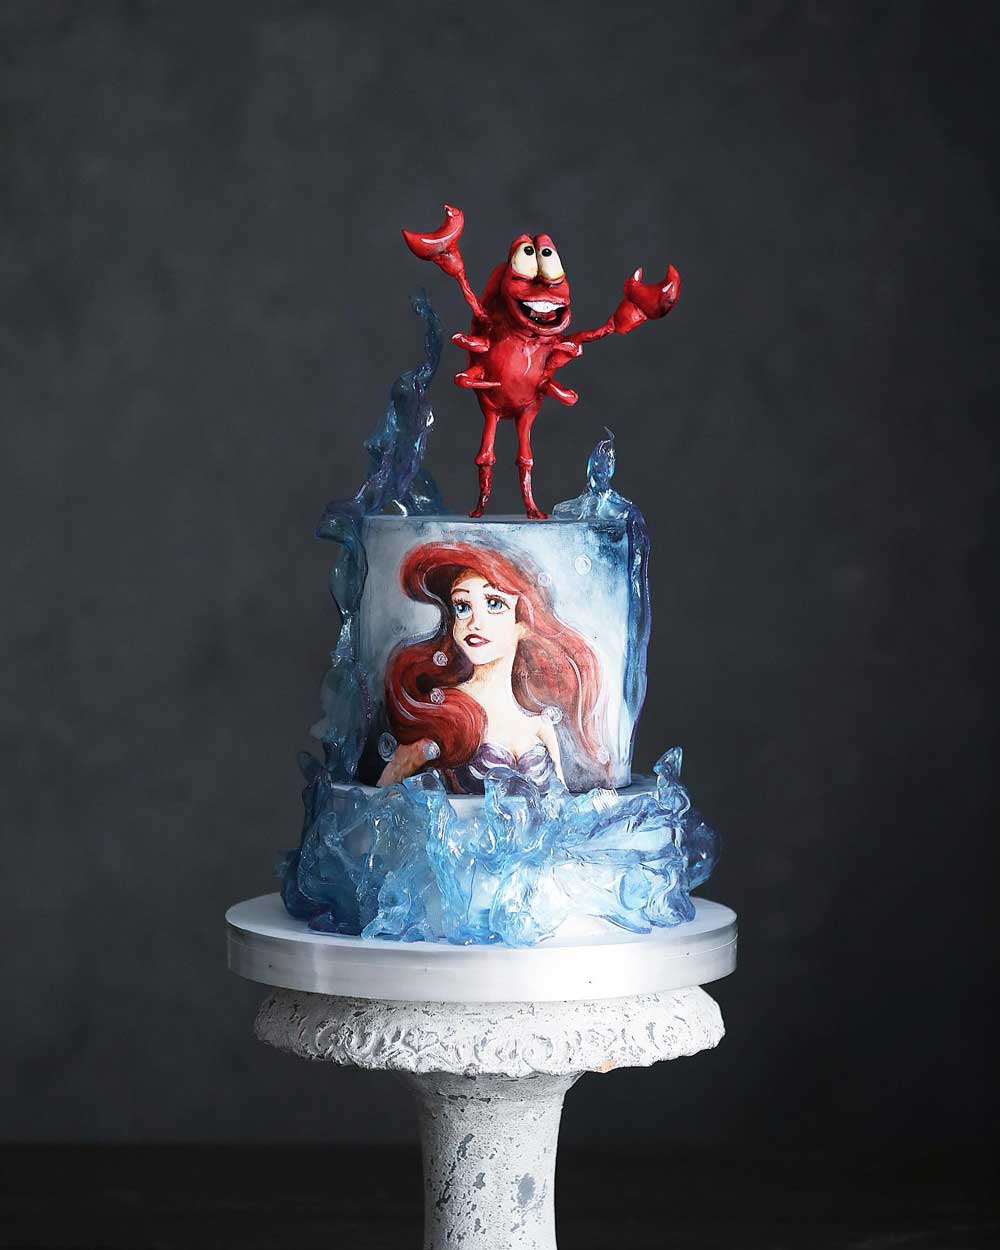 Blue Hand-painted Ariel cake